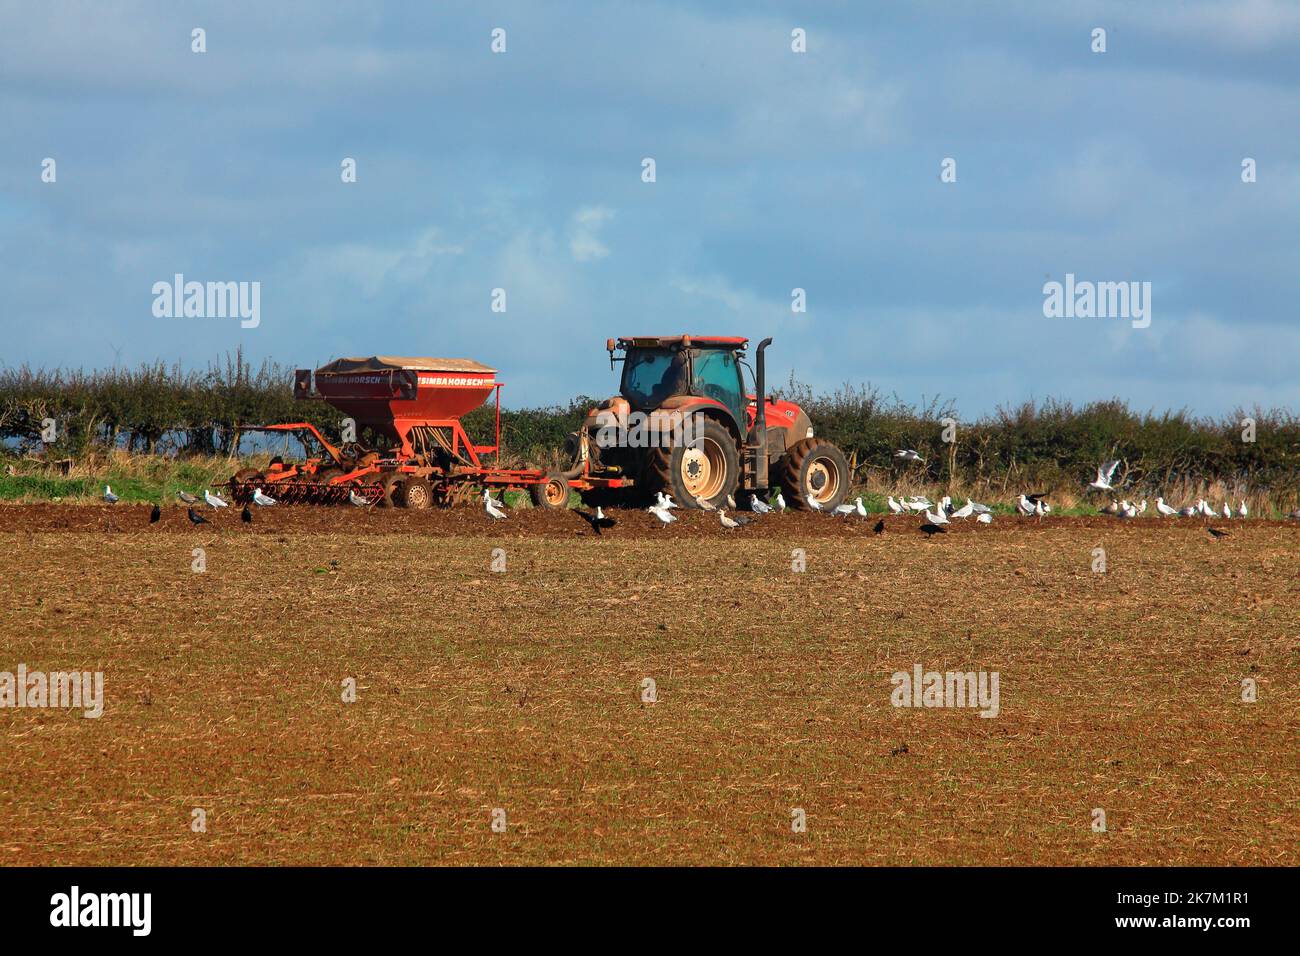 A local farmer out on his Tractor towing am automatic seeding machine for the next crop in this recently ploughed field. Stock Photo